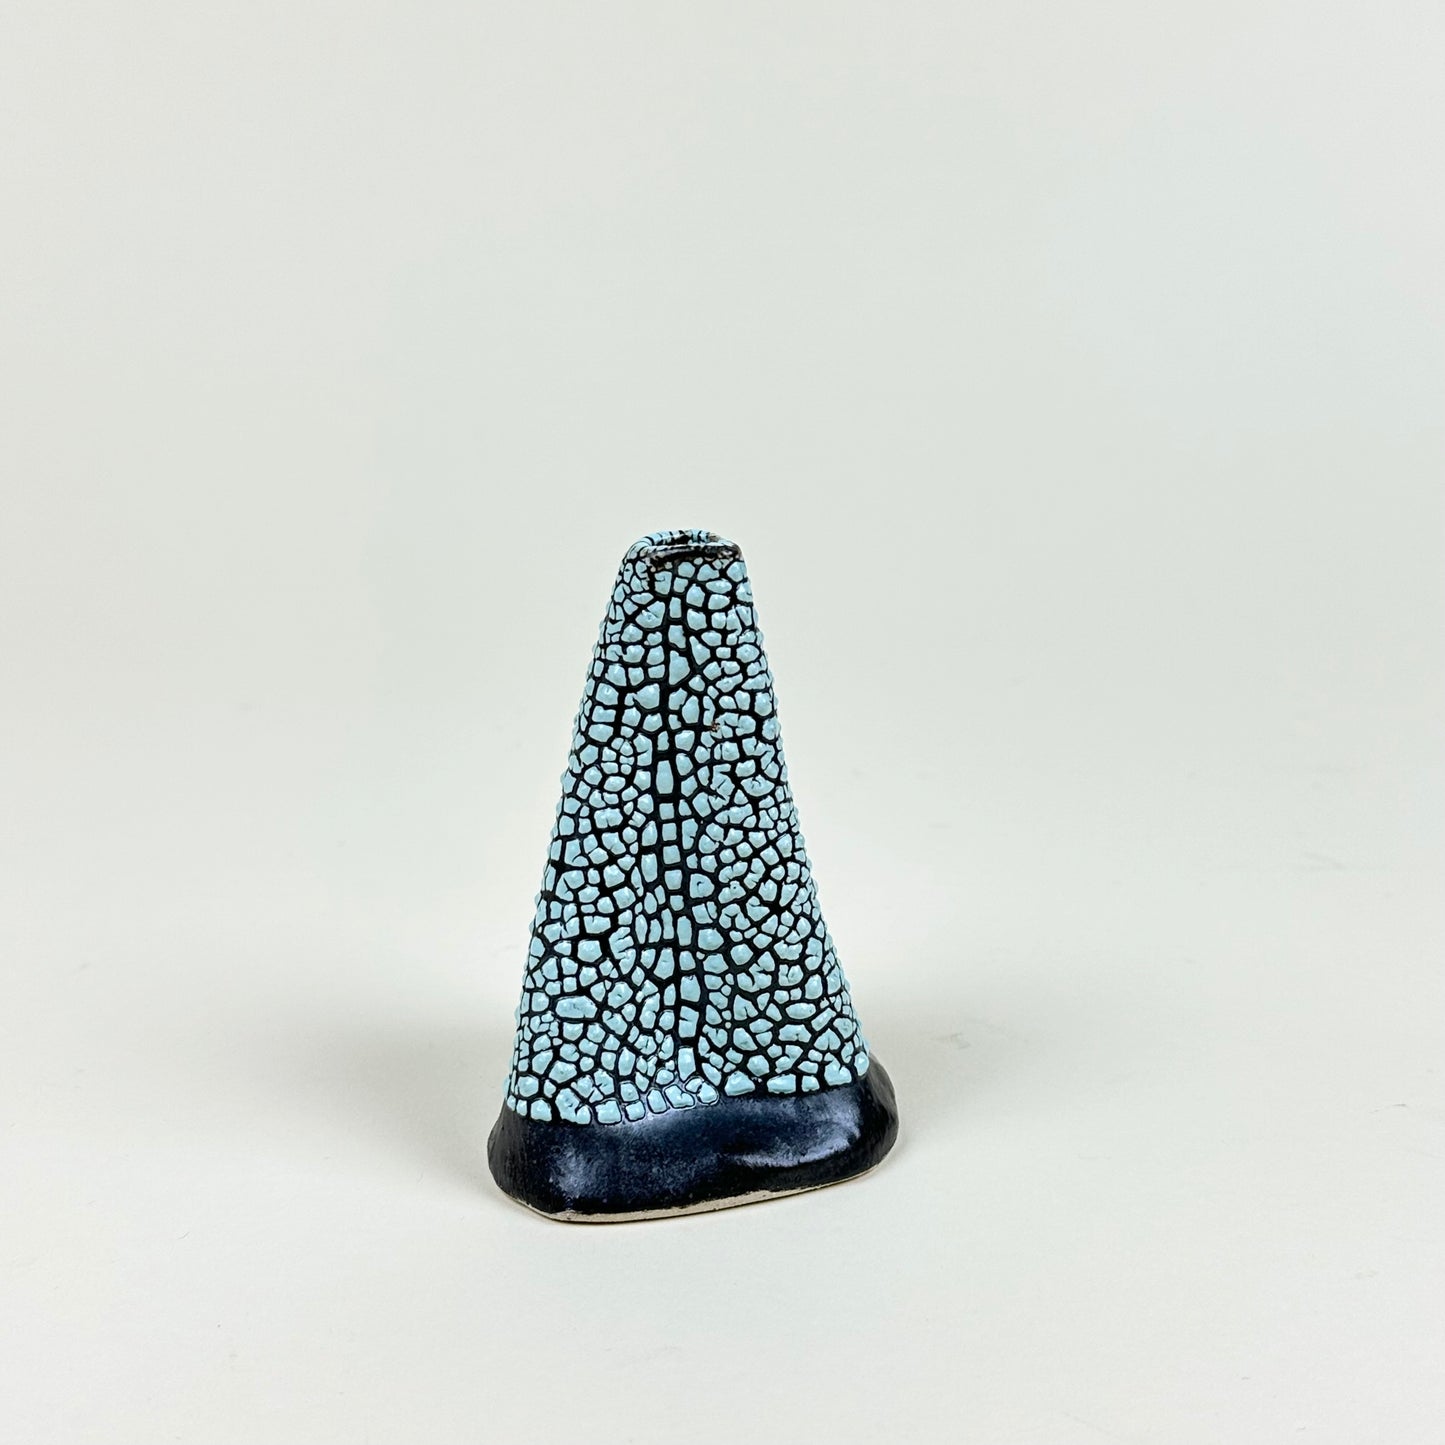 Black and turquoise volcano vase (S) by Astrid Öhman.